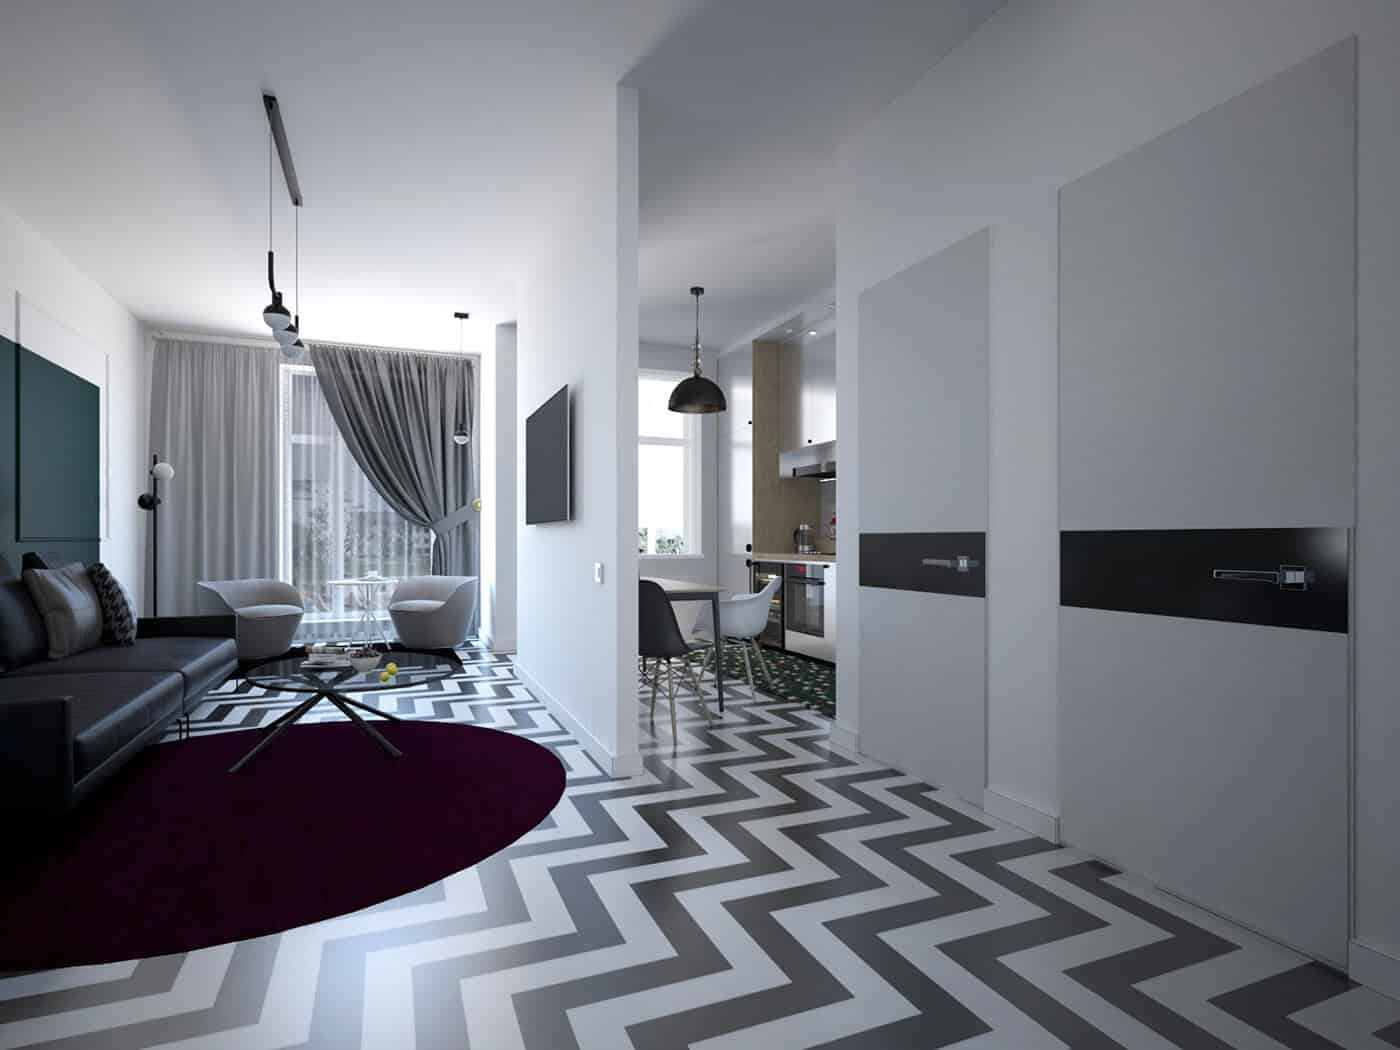 classic black and white pattern on the floor